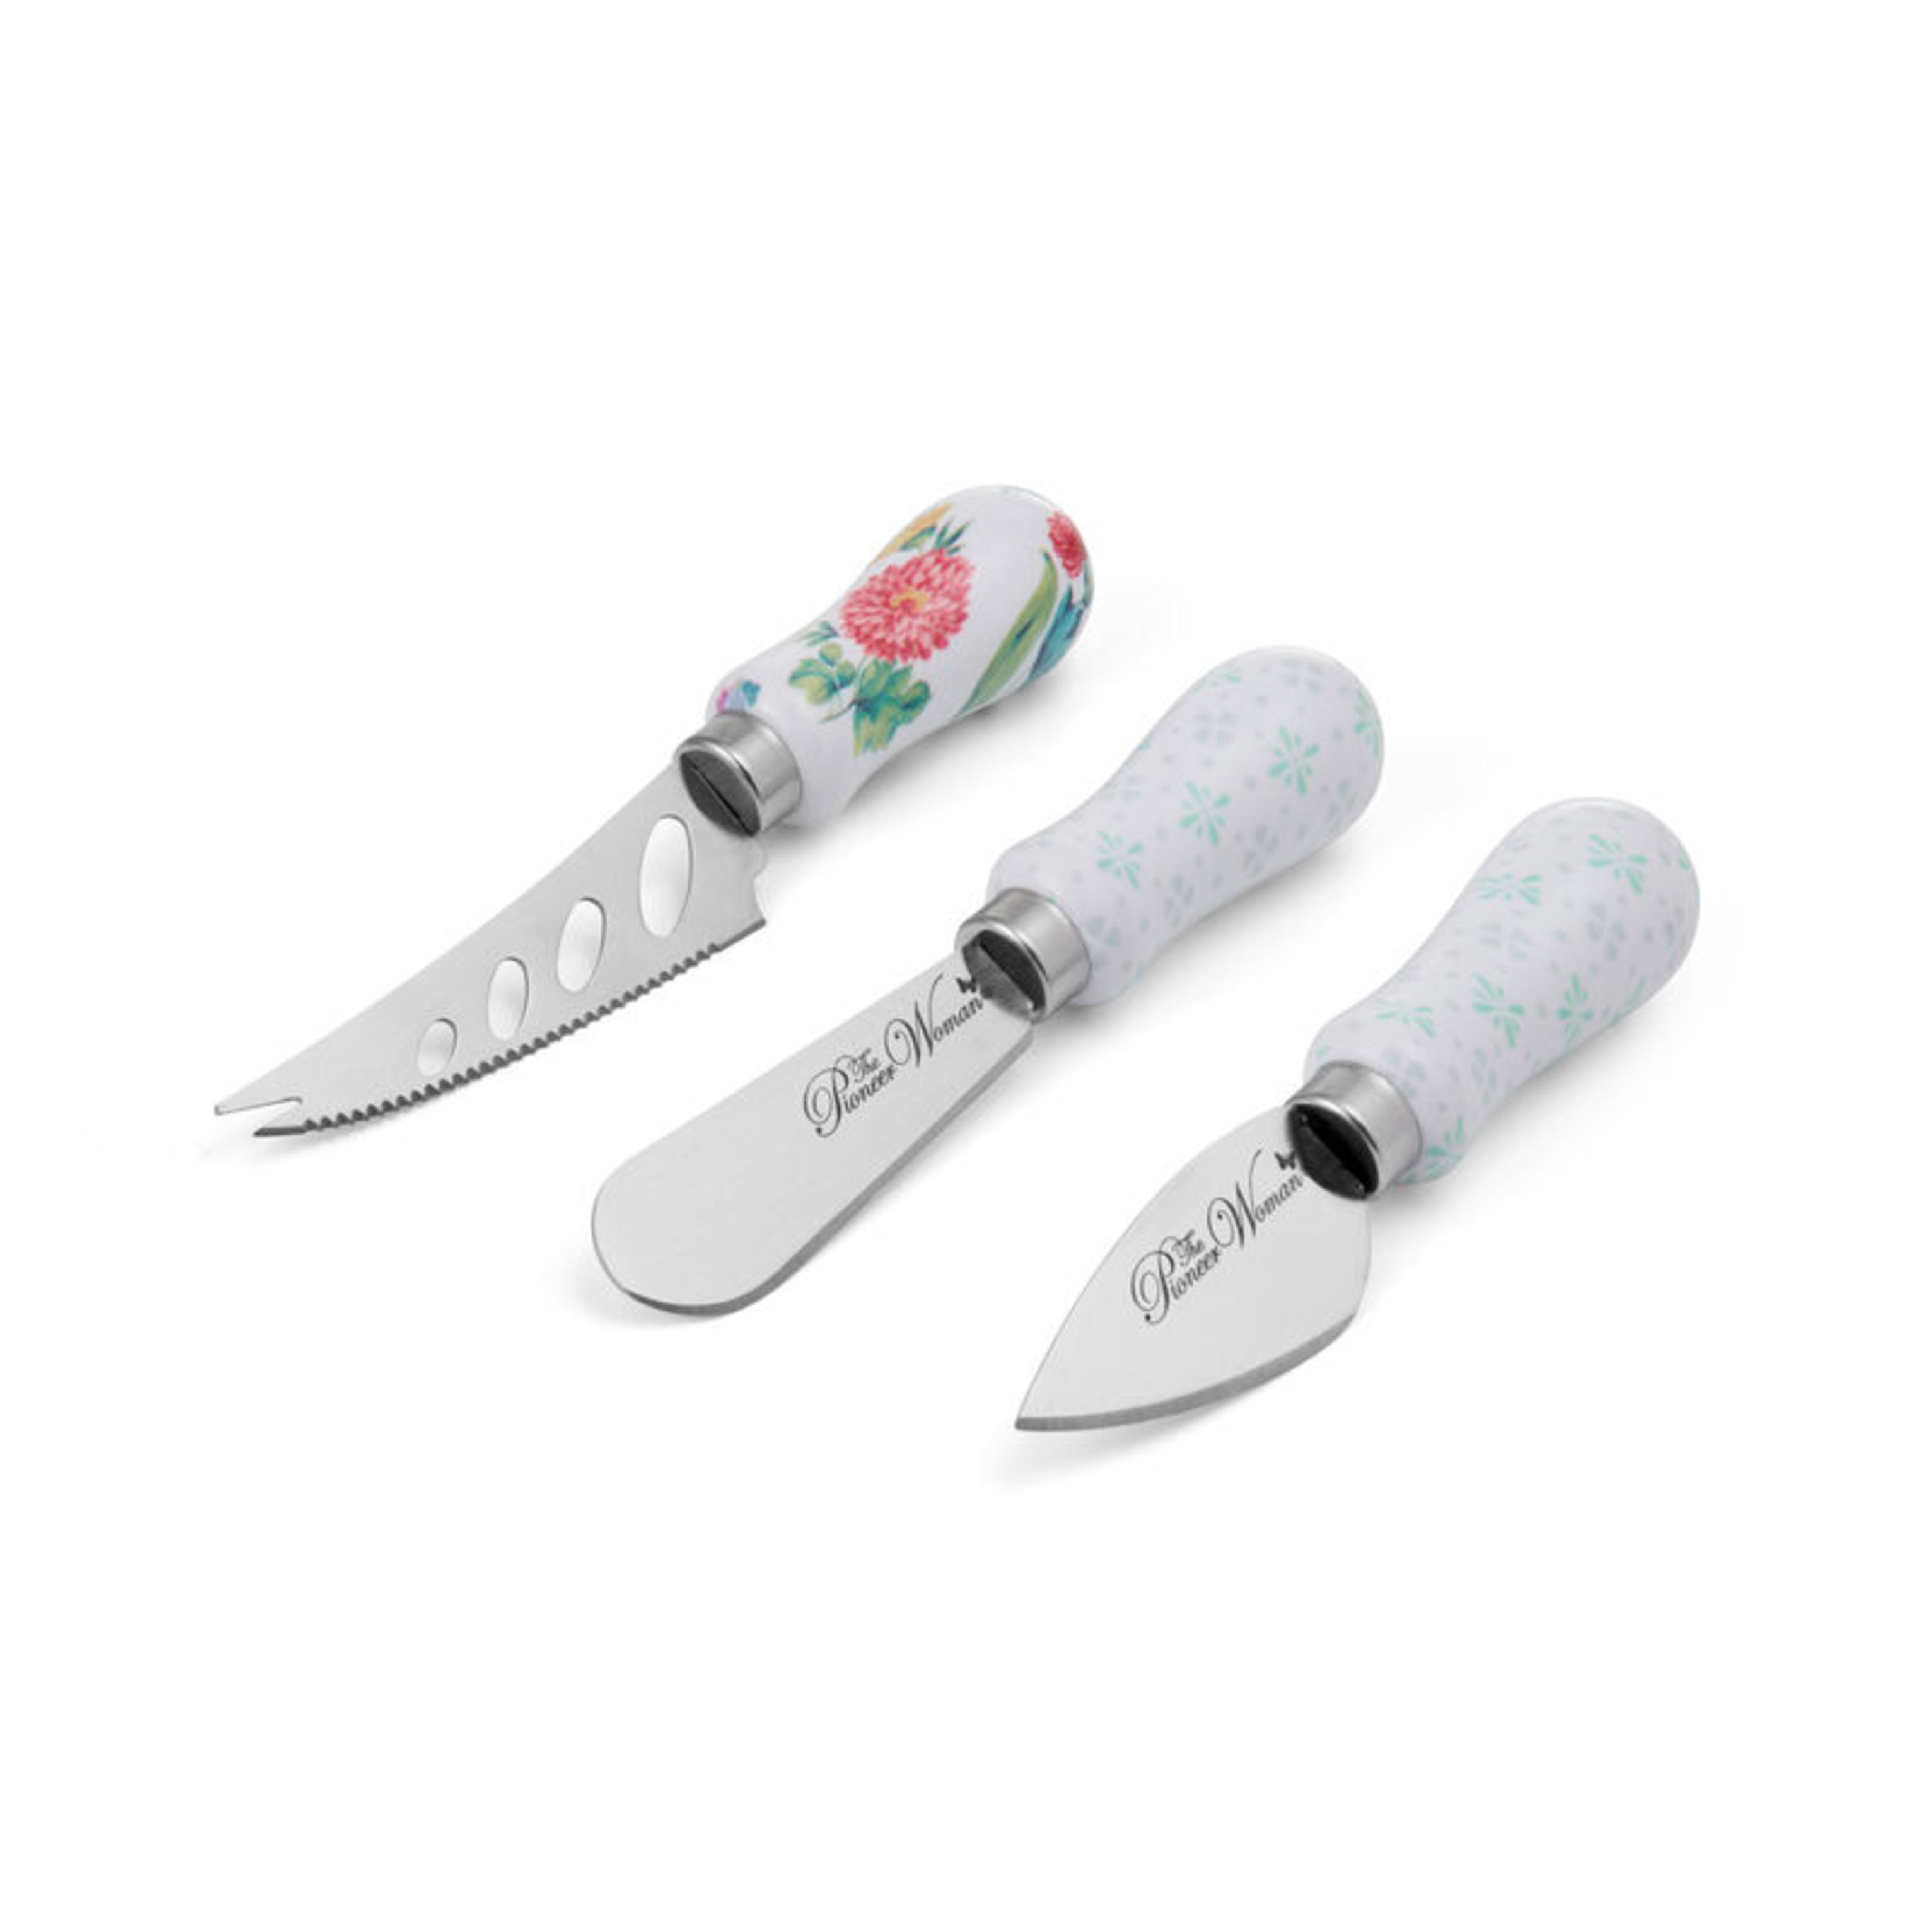 Pioneer Woman 4 pc Cheese Knife Set Heritage Floral Delft Toile Charcuterie